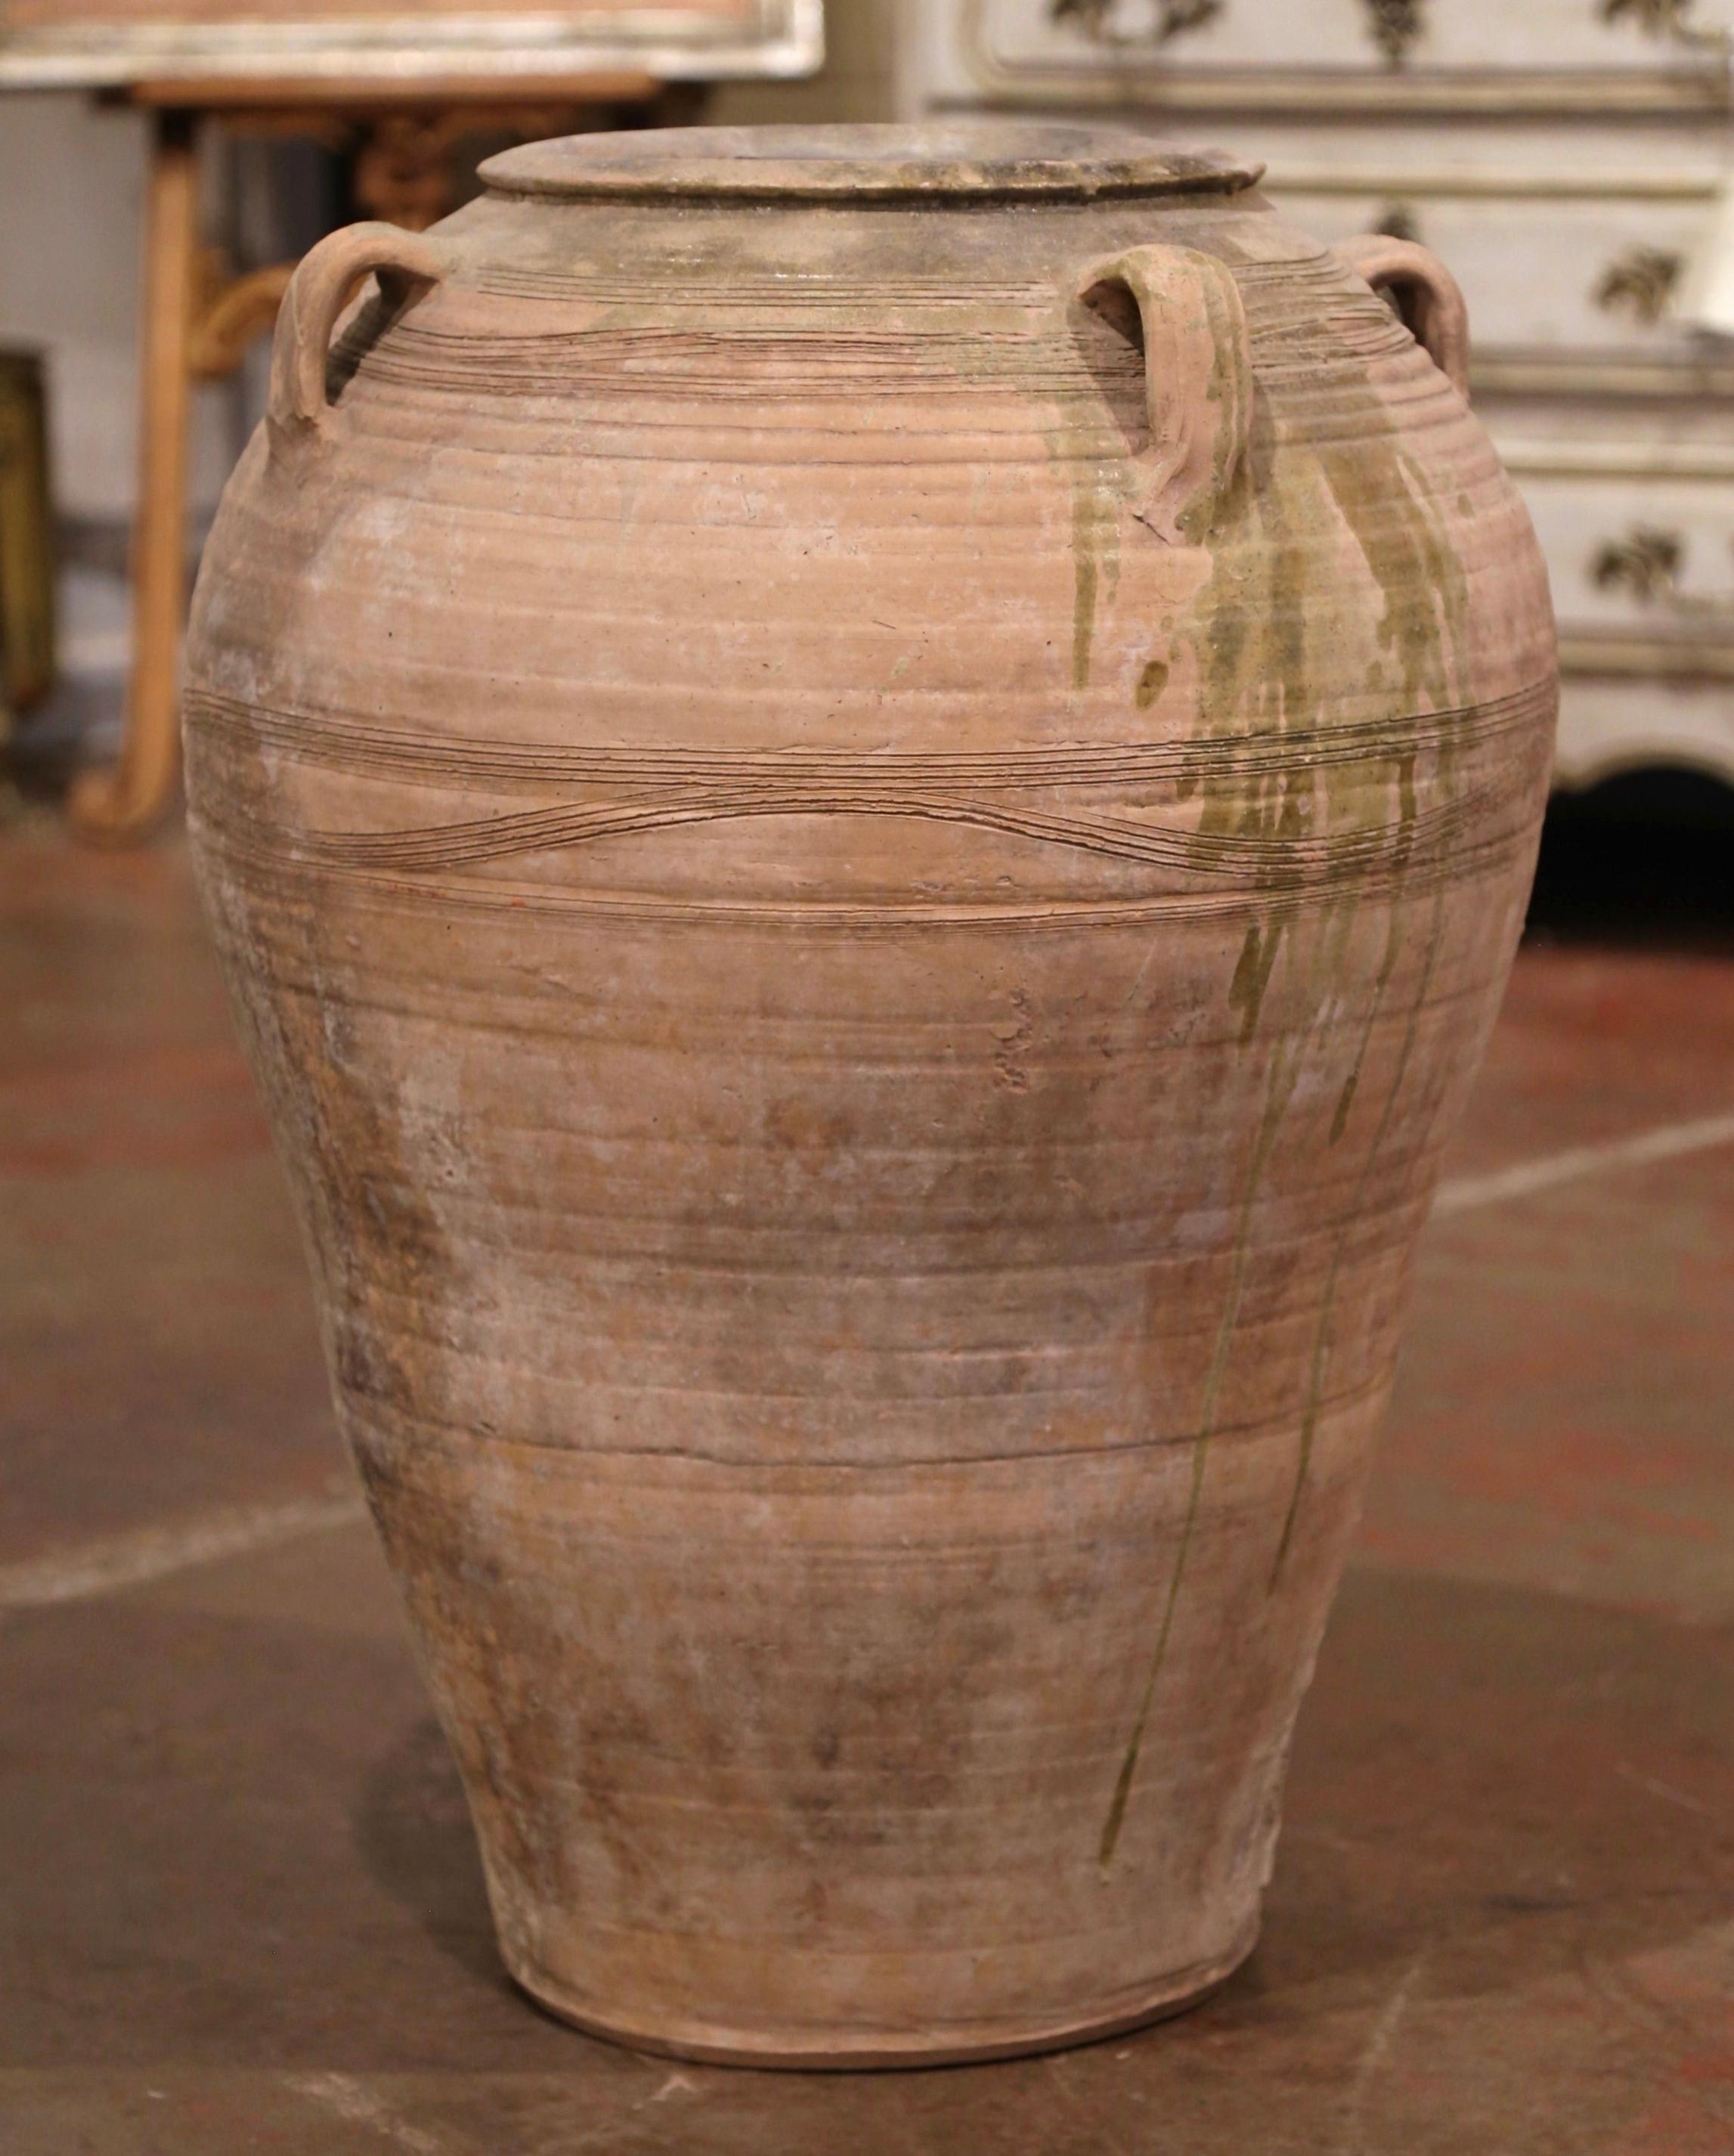 This large, antique earthenware jar was created in Southern France, circa 1870. Made of blond clay, the tall vessel is round in shape with a tapered base and decorated with four handles at the top; the olive jar is embellished with a terracotta